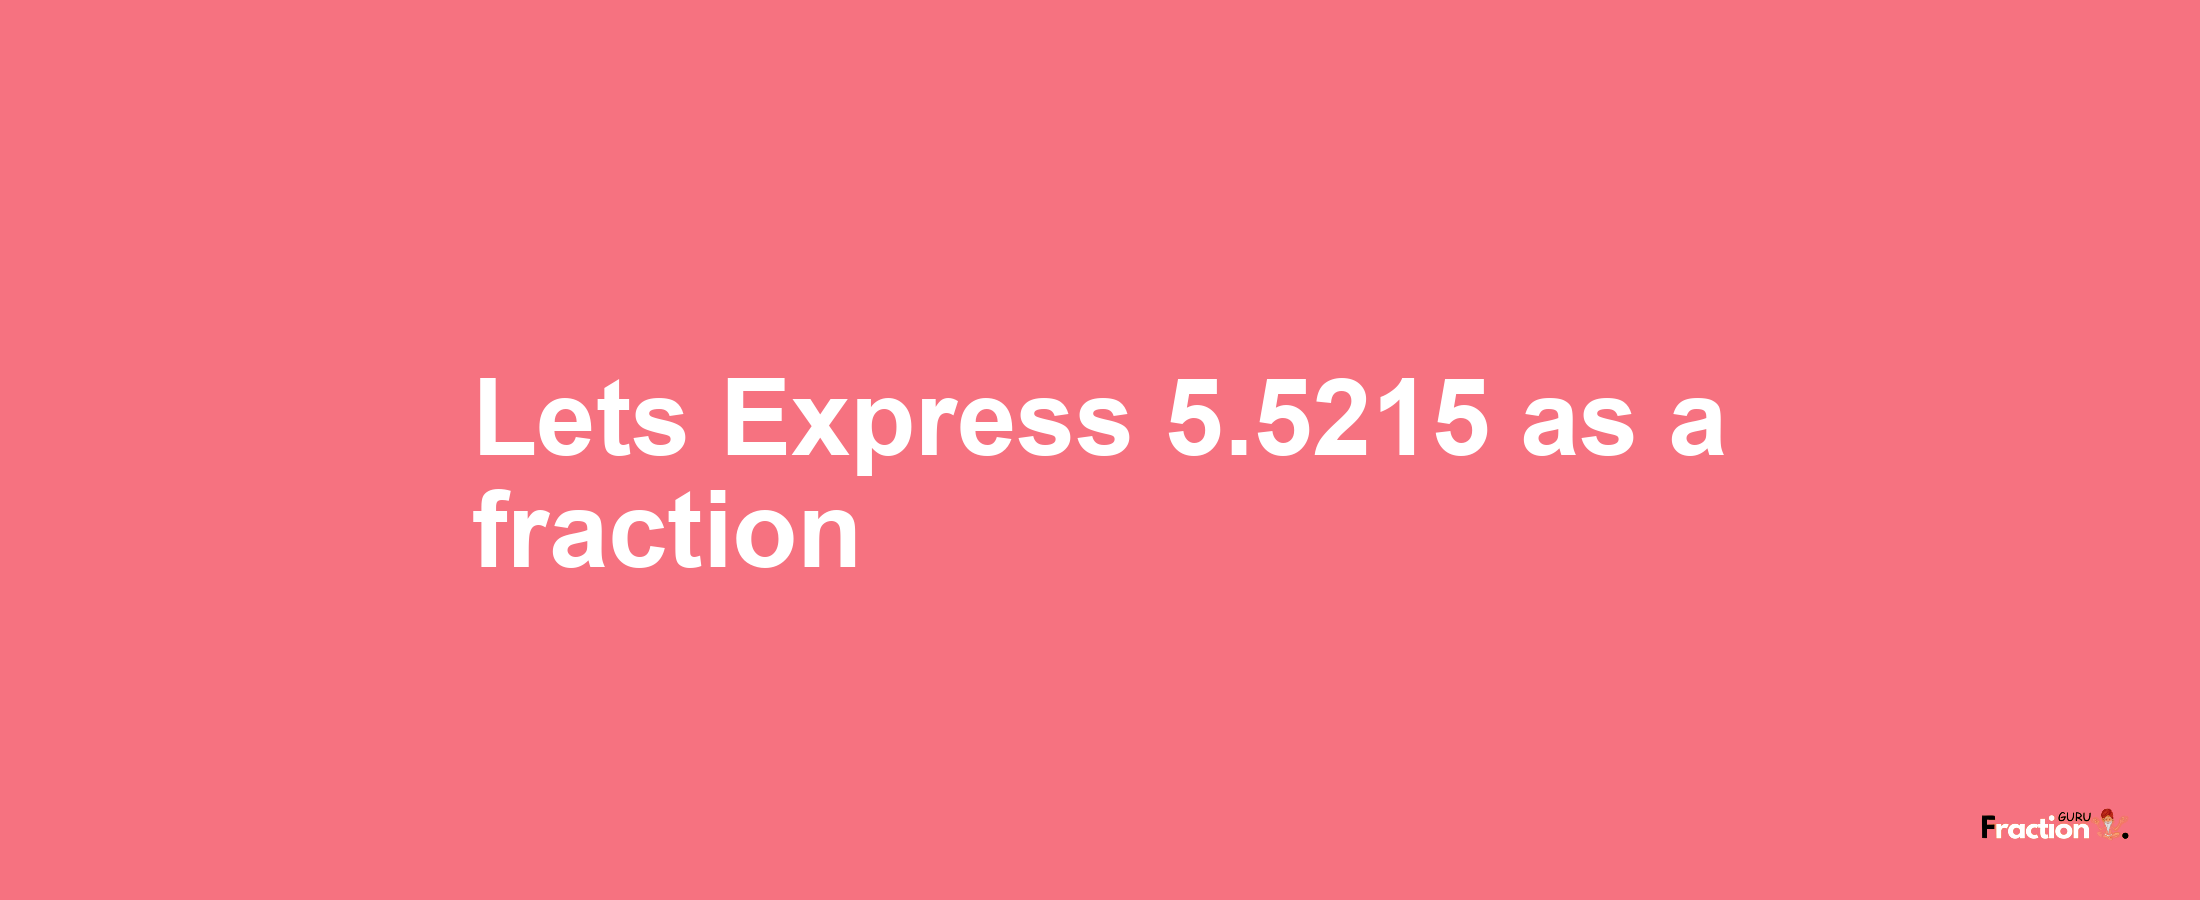 Lets Express 5.5215 as afraction